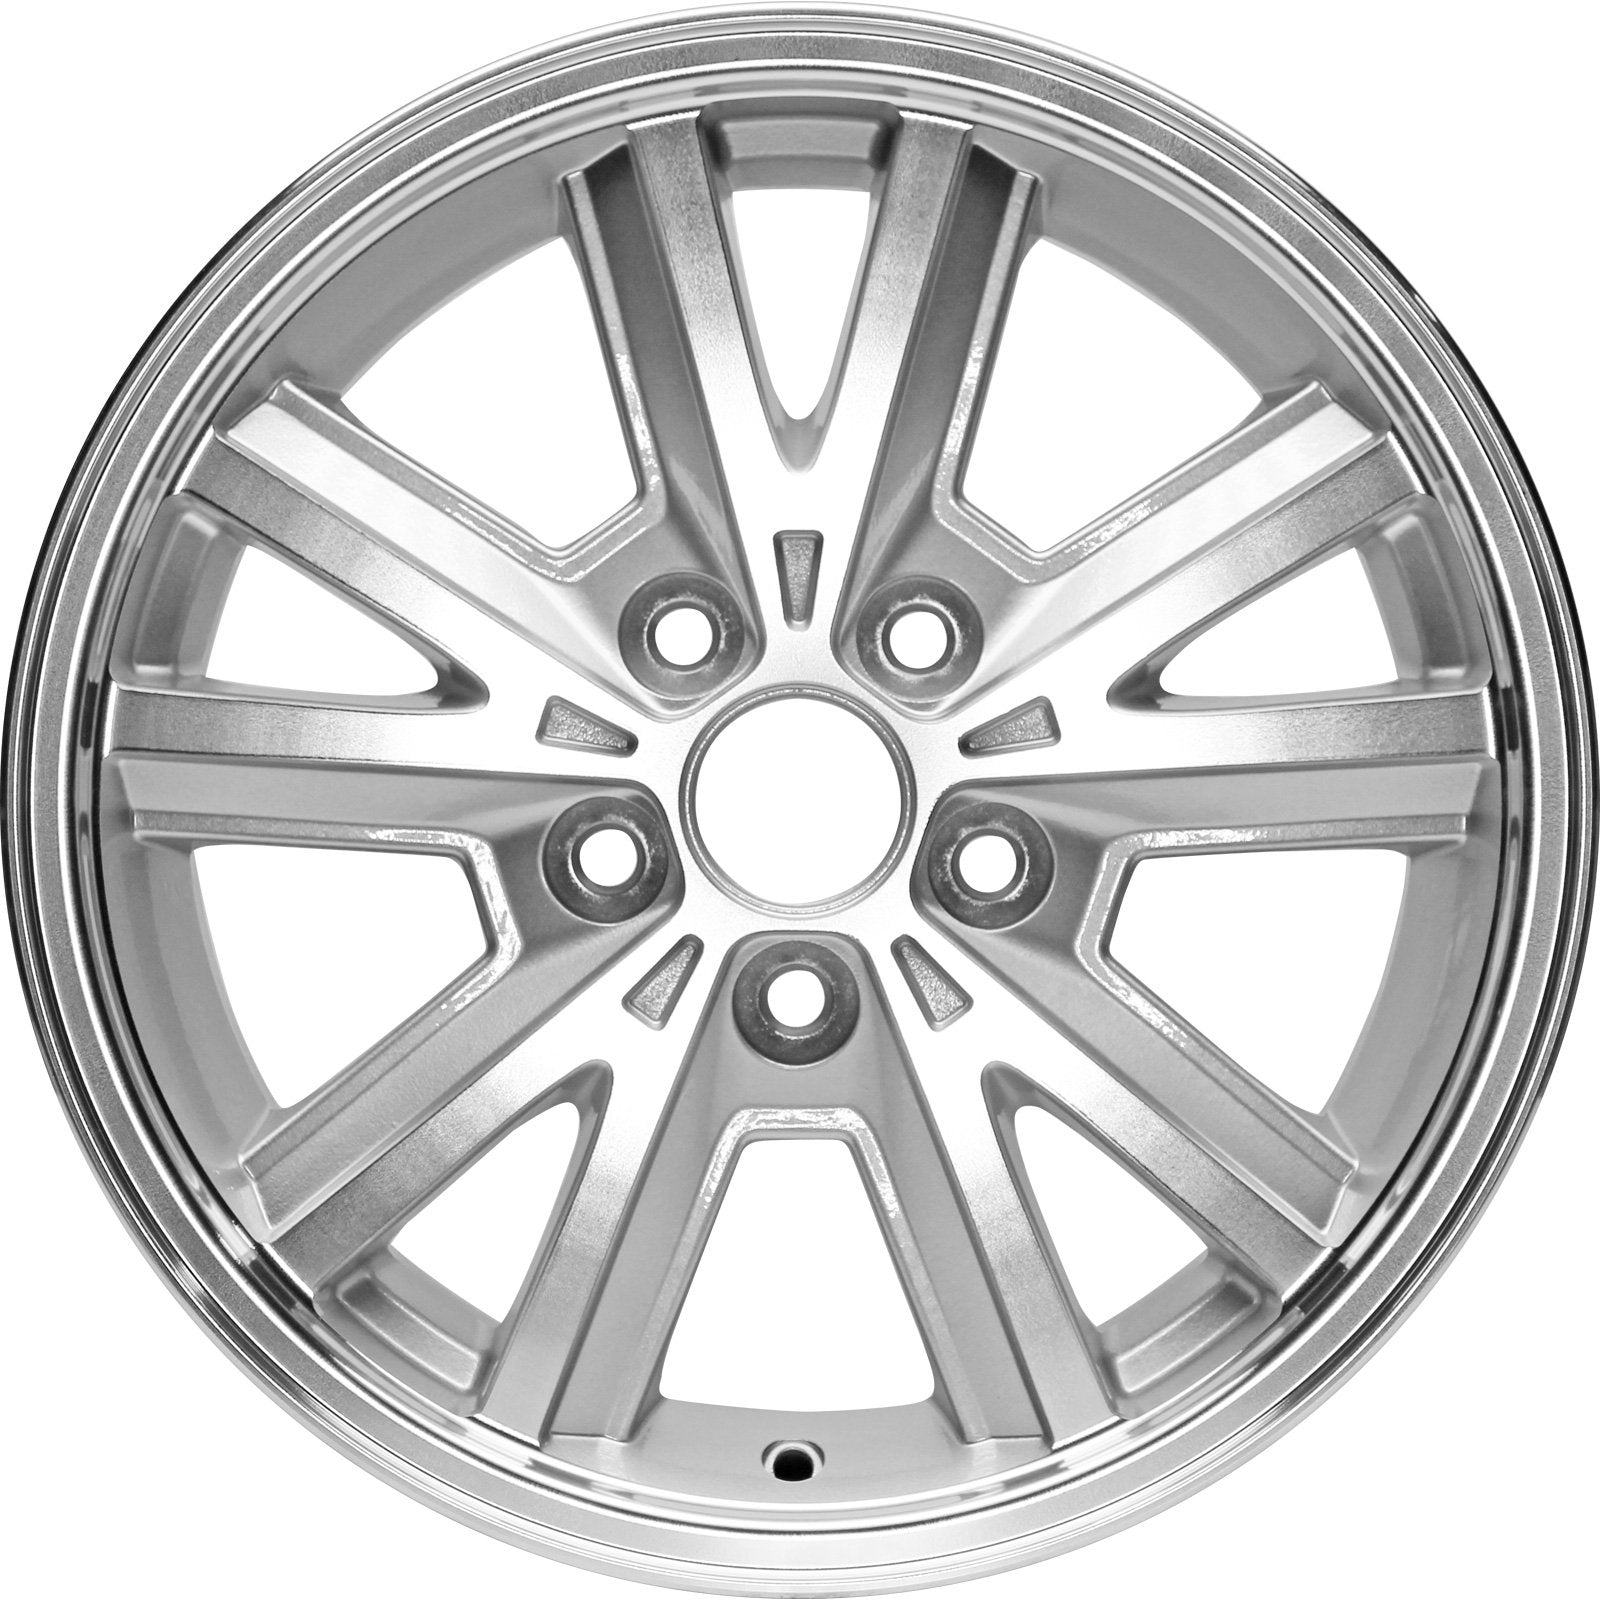 2005 Ford Mustang New 16" Replacement Wheel Rim RW3588MS